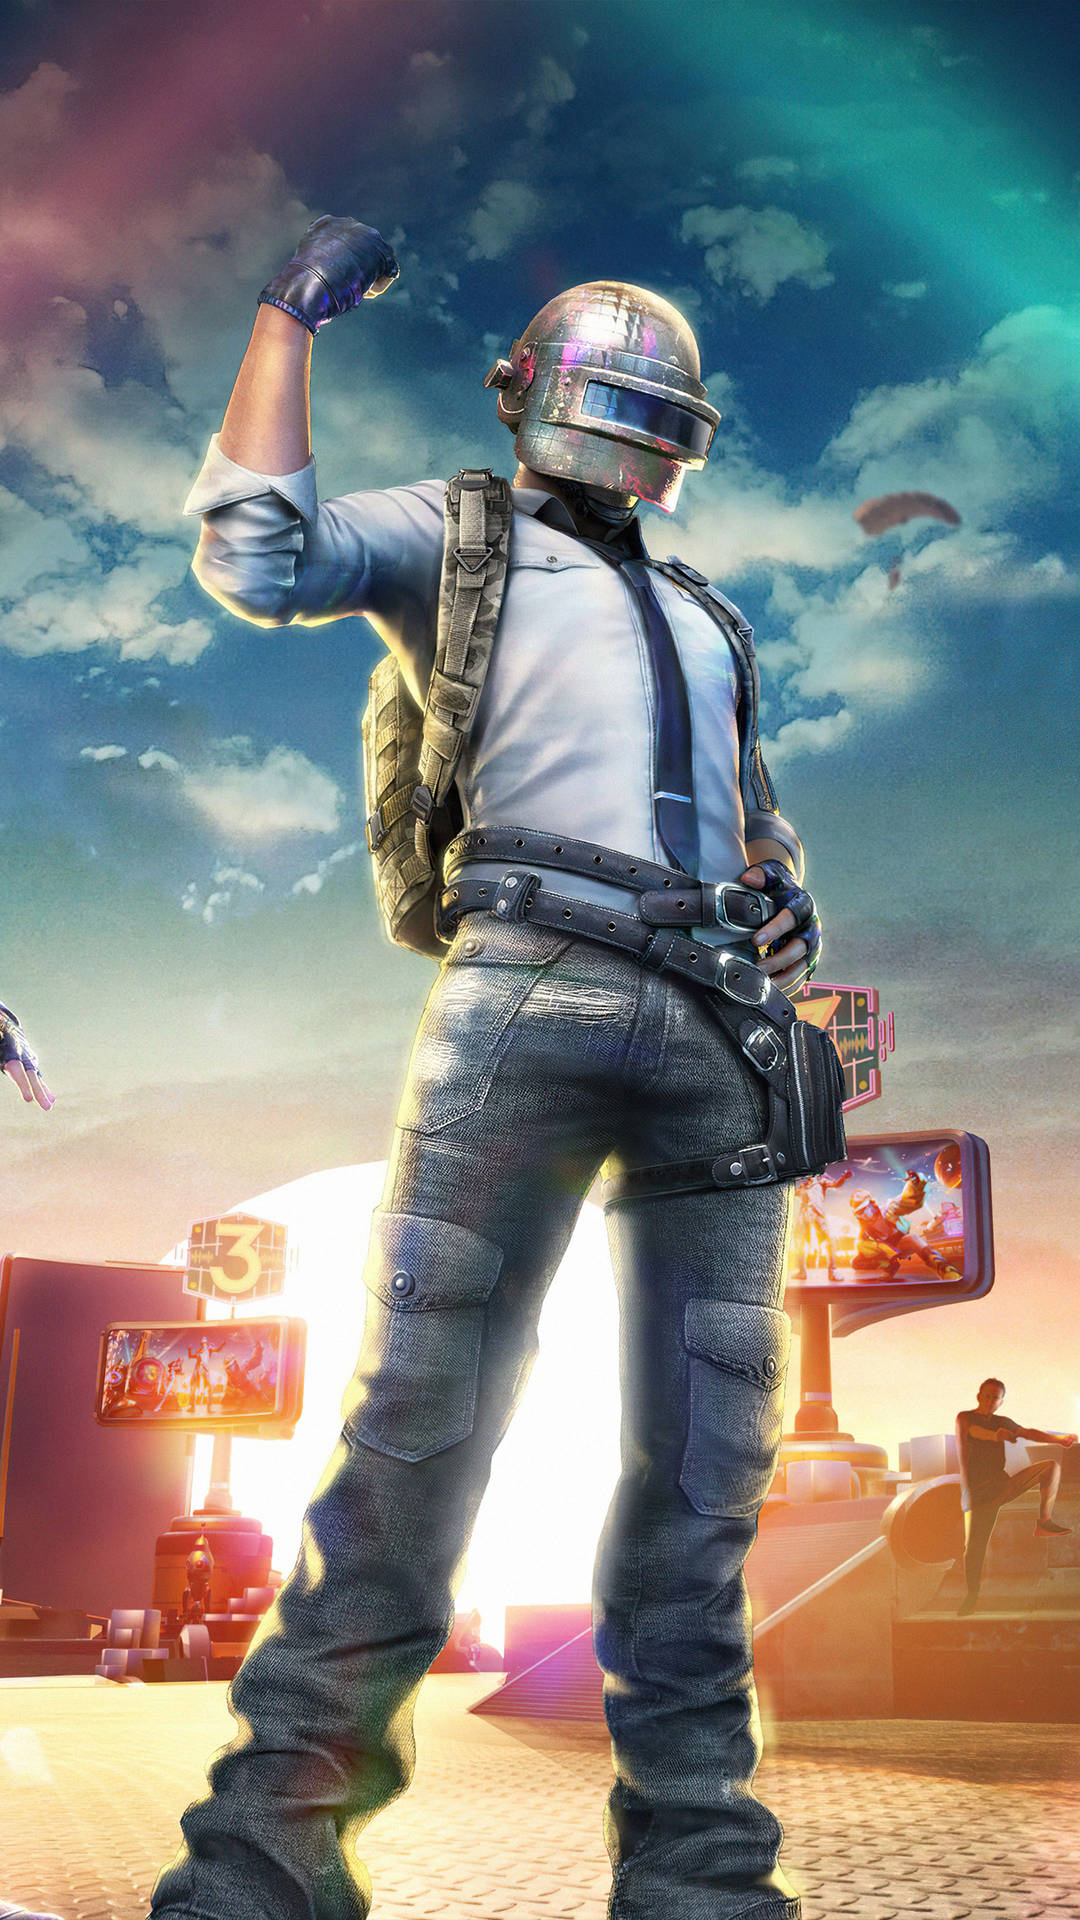 PUBG Mobile 4K Wallpapers | HD Wallpapers | ID #30622